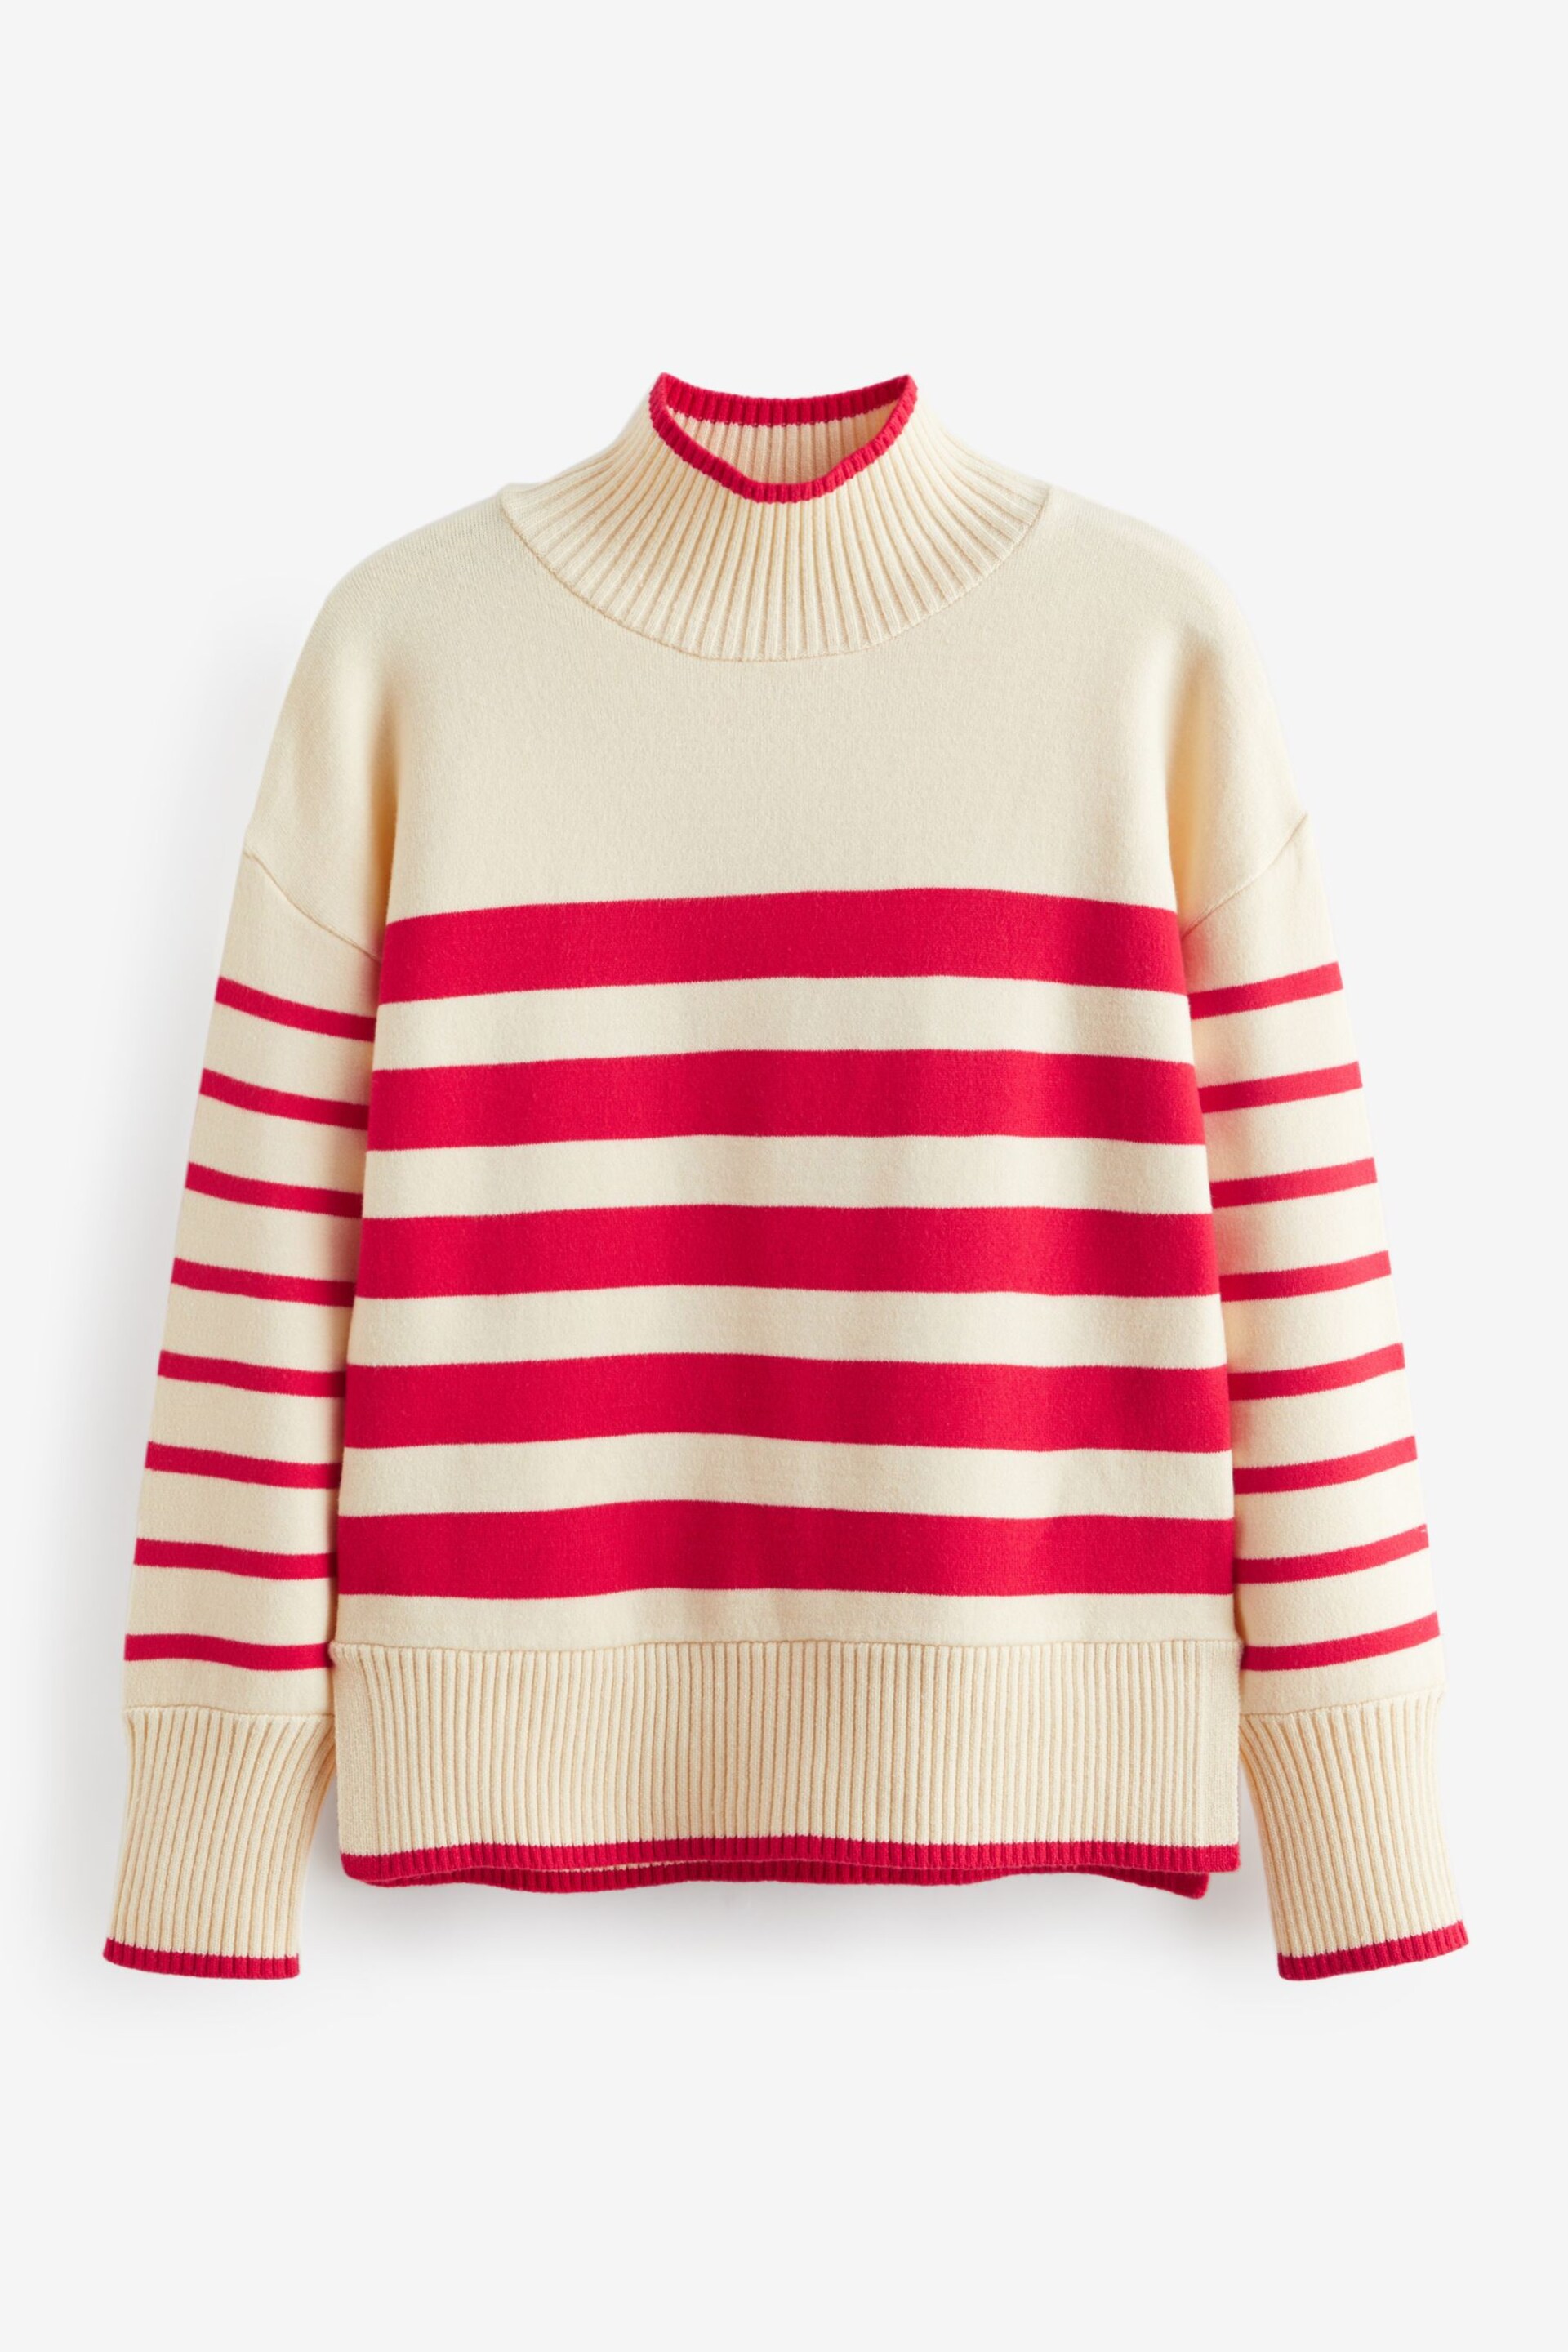 Red/Ecru Cream High Neck Stripe Cosy Knitted Jumper Long Sleeve Top - Image 6 of 7